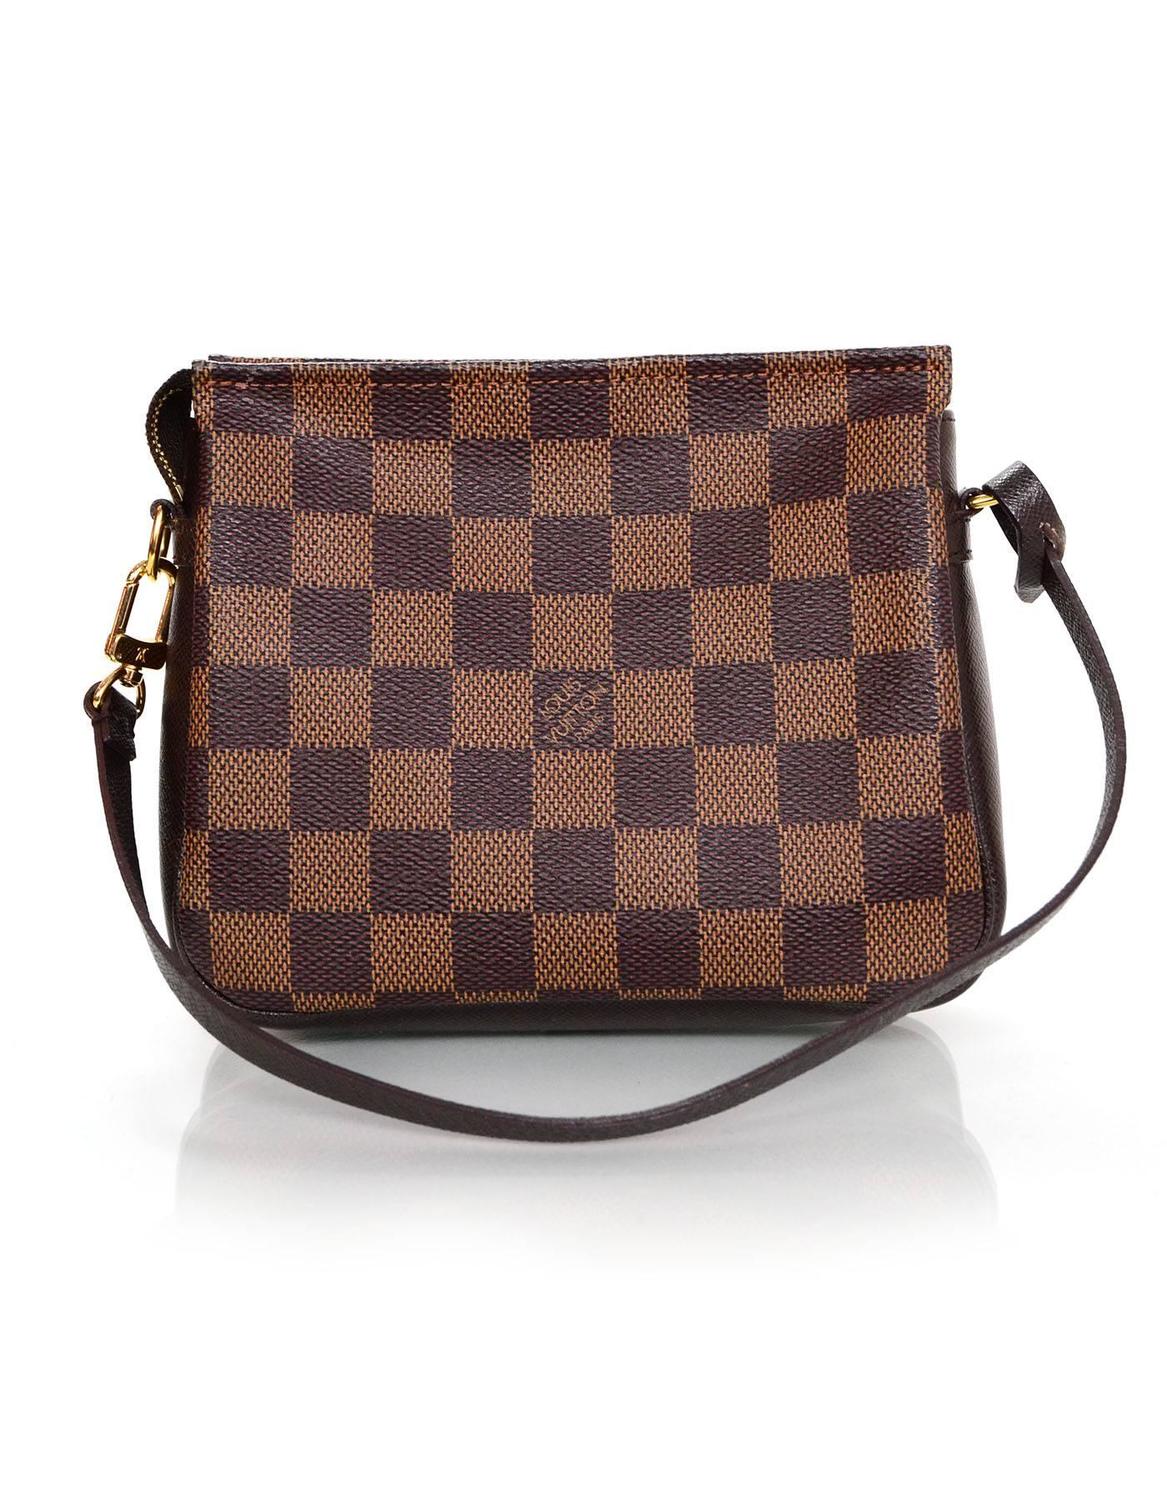 Louis Vuitton Handbags Under 2000 | Confederated Tribes of the Umatilla Indian Reservation